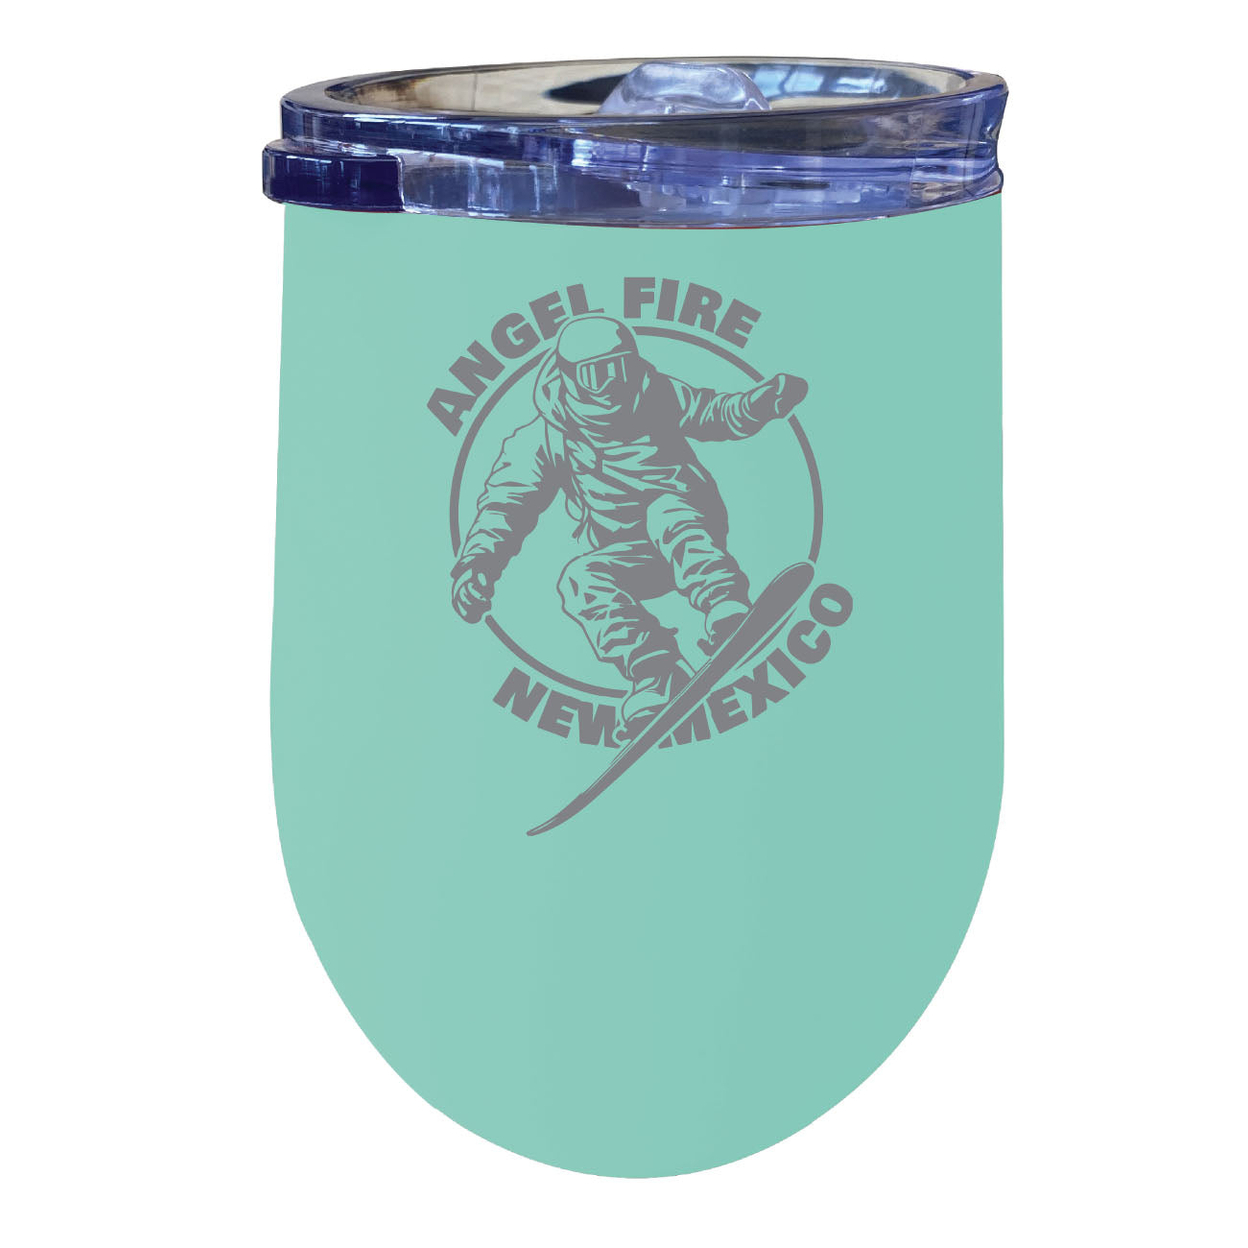 Angel Fire New Mexico Souvenir 12 Oz Engraved Insulated Wine Stainless Steel Tumbler - Seafoam,,2-Pack